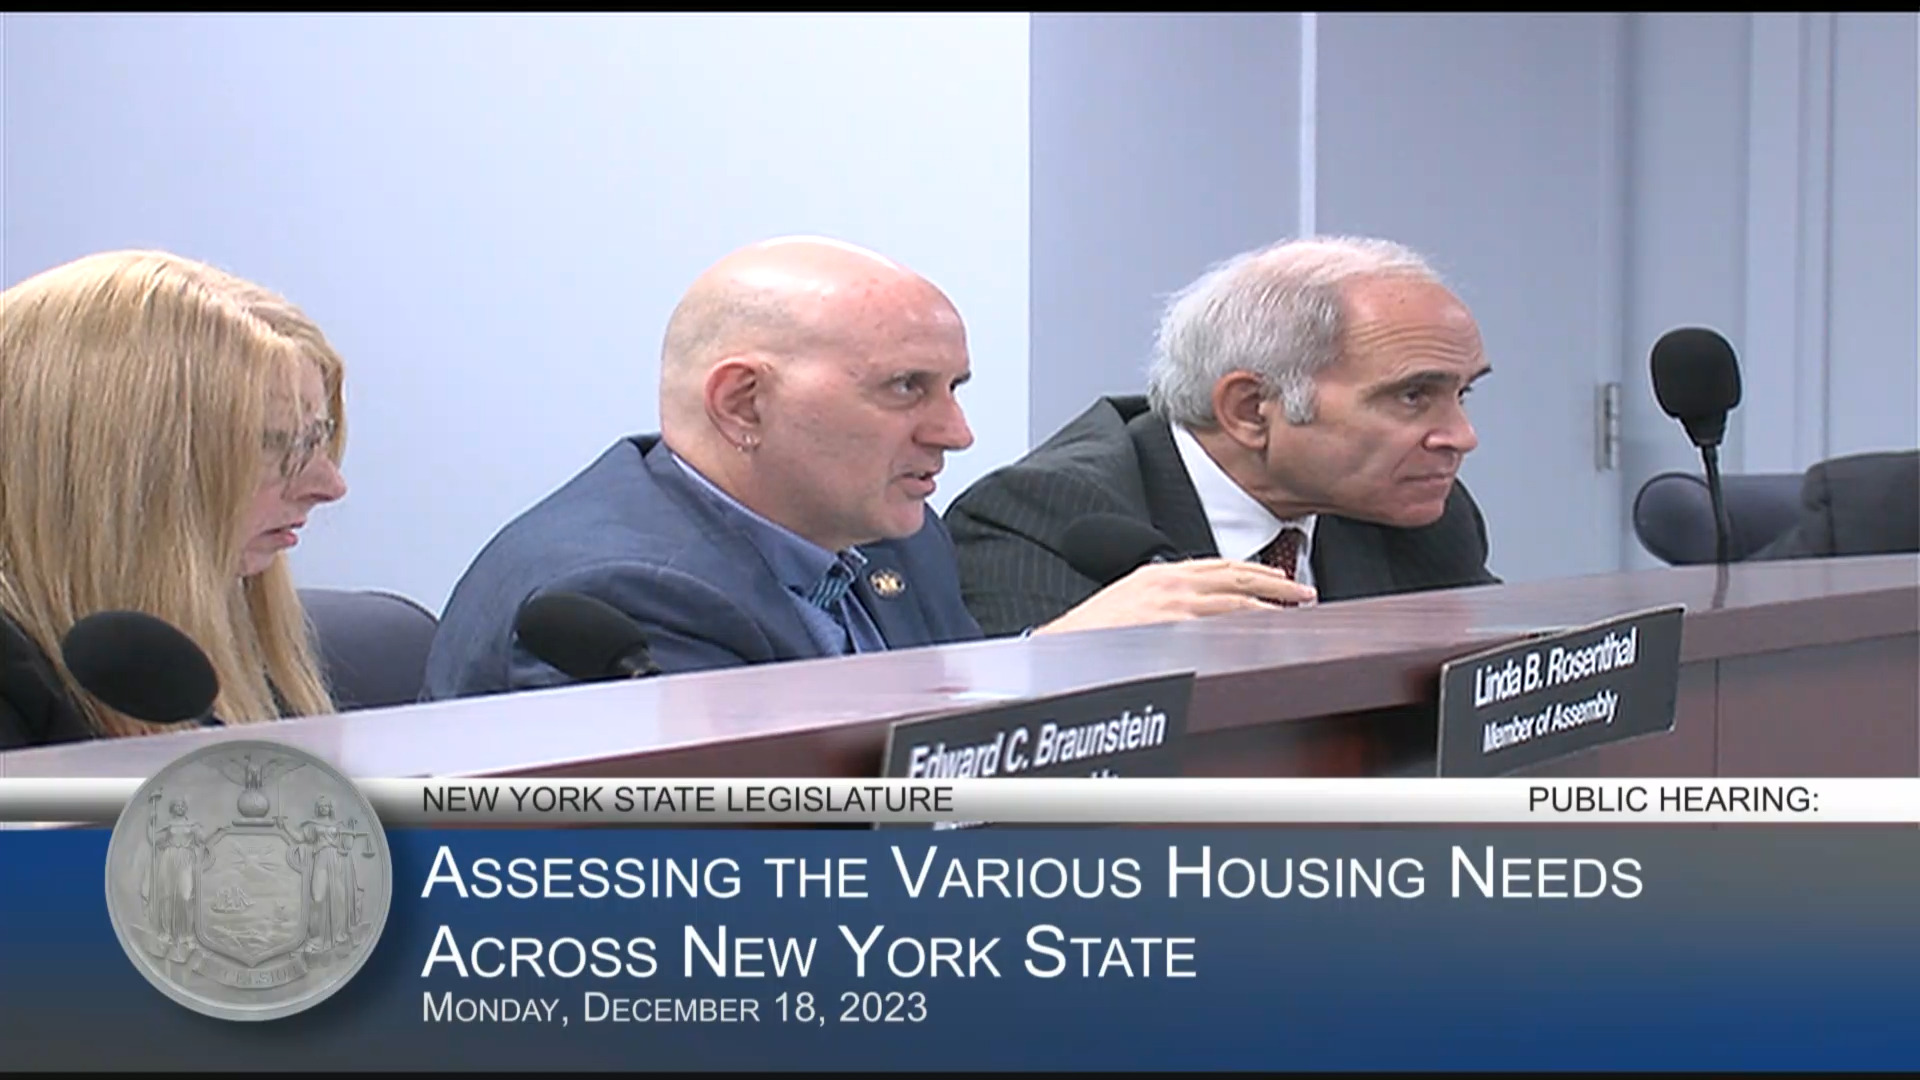 NYC Housing Officials Testify During a Public Hearing to Assess the Various Housing Needs Across NYS